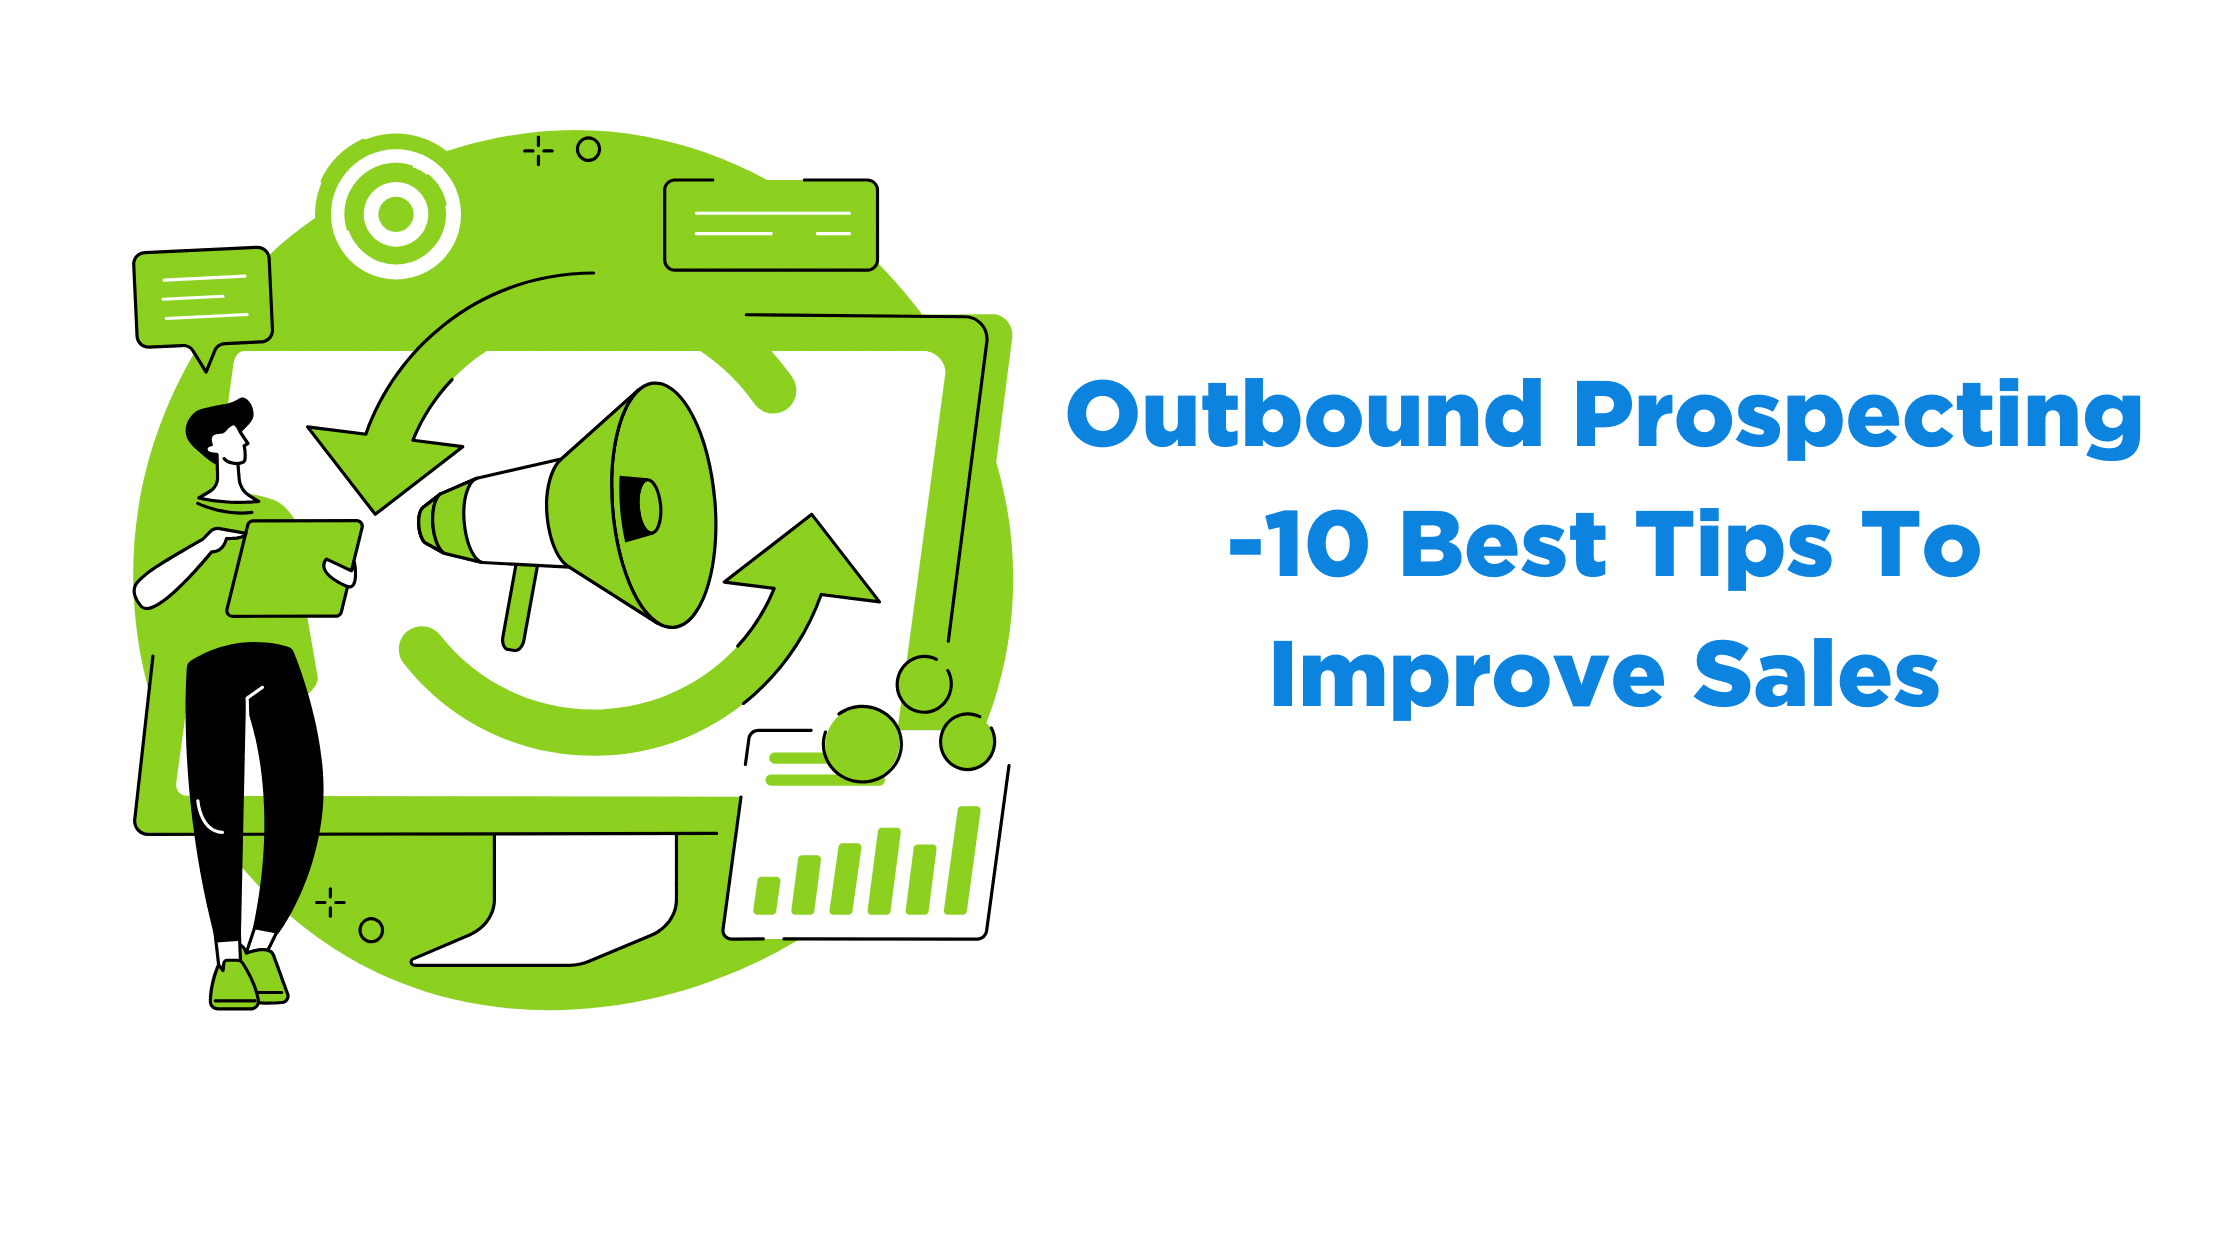 Outbound Prospecting -10 Best Tips To Improve Sales